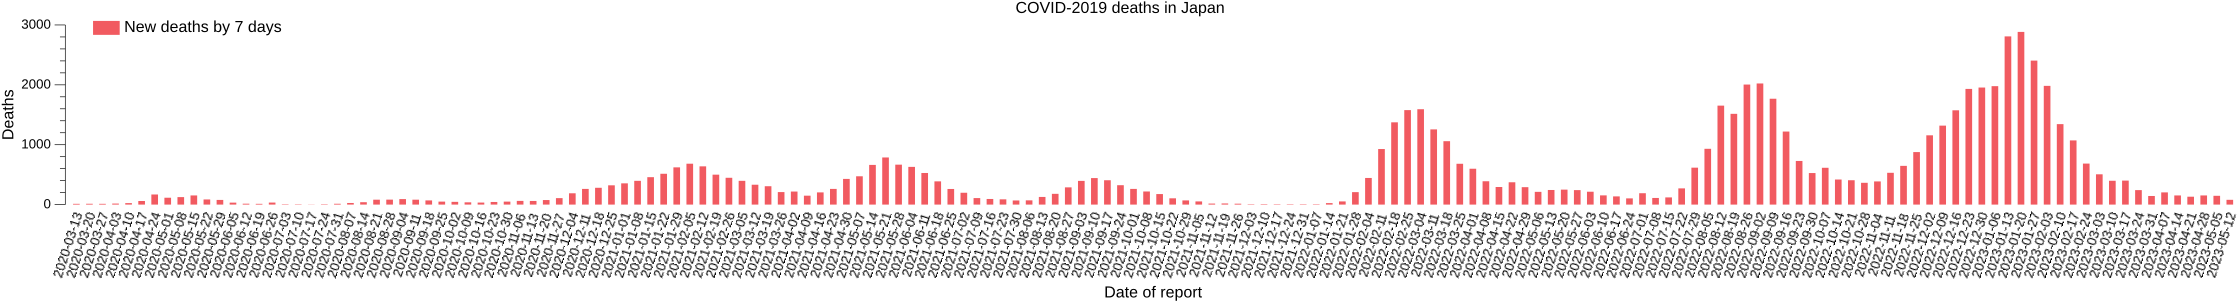 COVID-2019 deaths in Japan